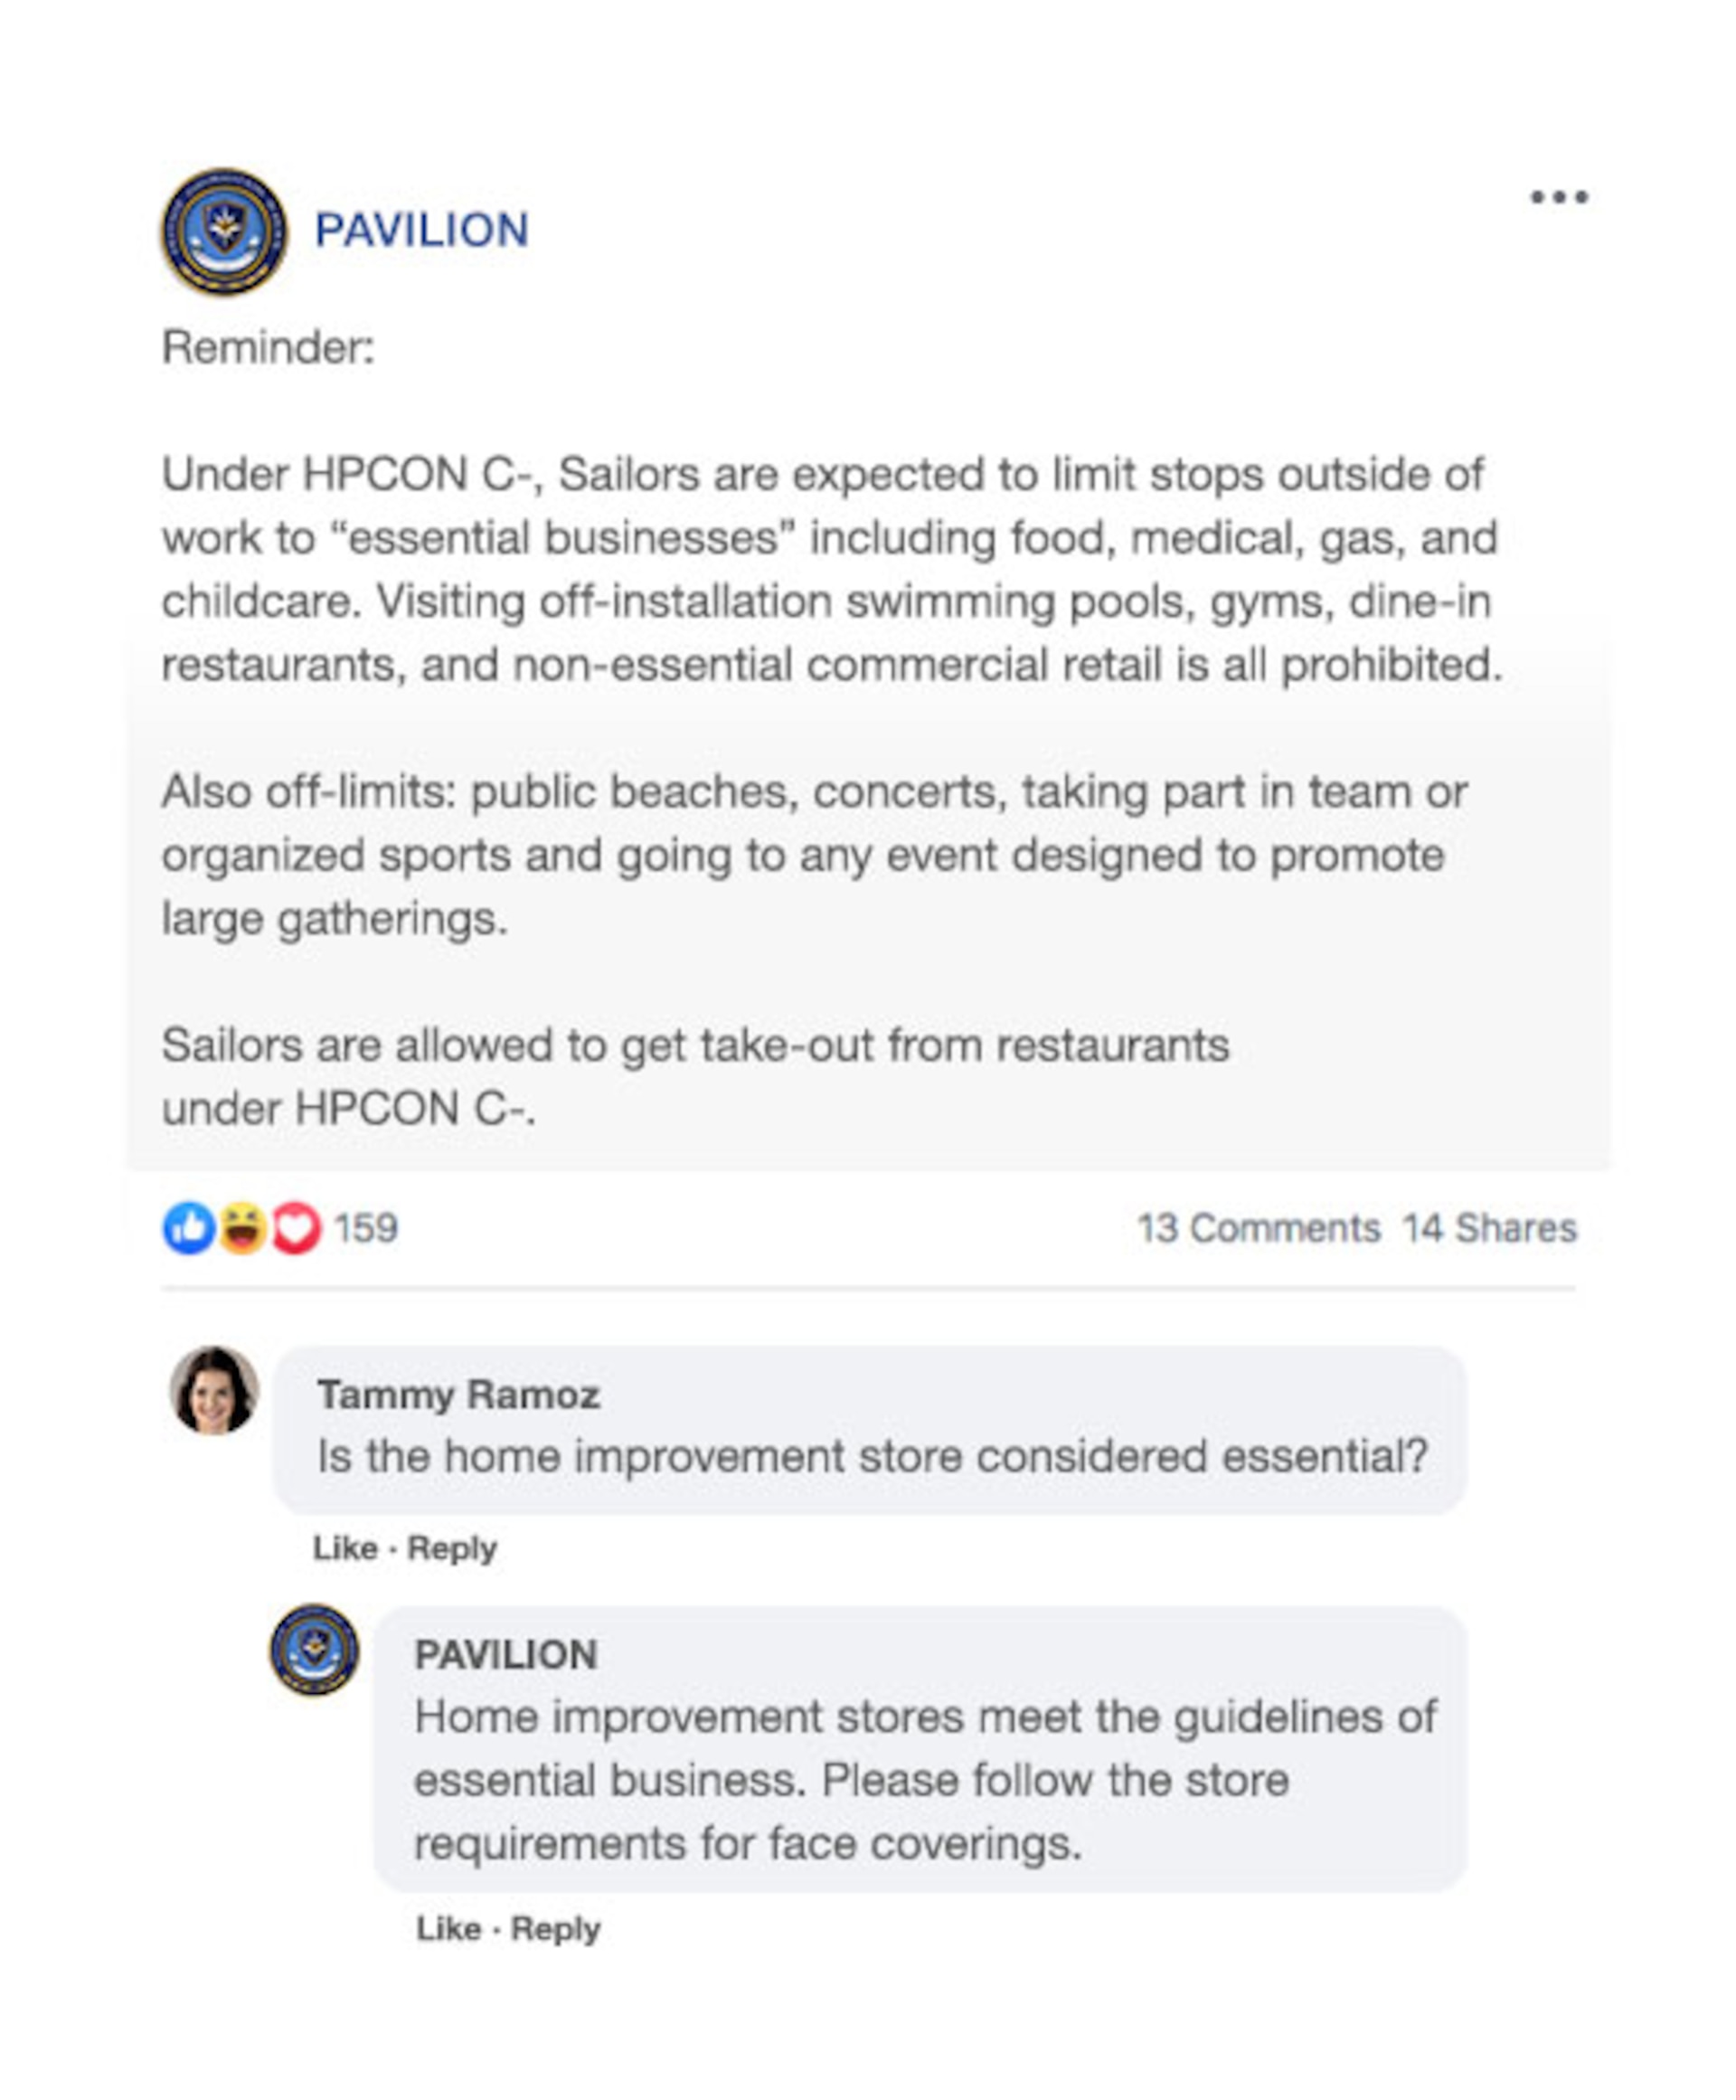 Mock Facebook post from PAVILION's account that reads, "Tammy Ramoz Comment: Is the home improvement store considered essential? Official PAVILION page reply: Home improvement stores meet the guidelines of essential business. Please follow the store requirements for face coverings."